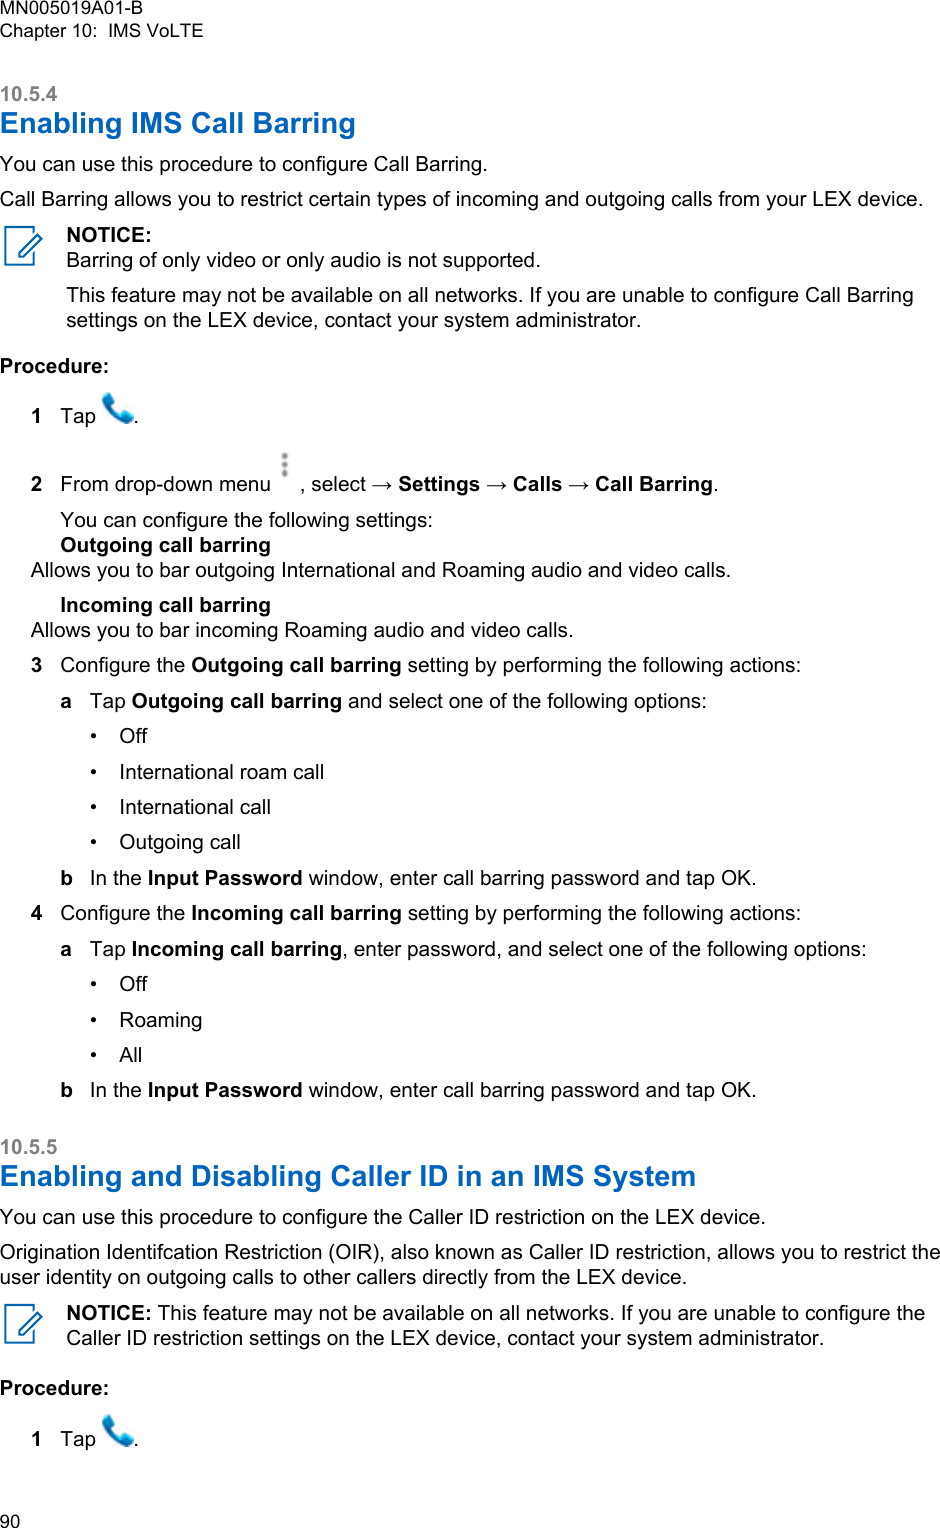 10.5.4Enabling IMS Call BarringYou can use this procedure to configure Call Barring.Call Barring allows you to restrict certain types of incoming and outgoing calls from your LEX device.NOTICE:Barring of only video or only audio is not supported.This feature may not be available on all networks. If you are unable to configure Call Barringsettings on the LEX device, contact your system administrator.Procedure:1Tap  .2From drop-down menu , select → Settings → Calls → Call Barring.You can configure the following settings:Outgoing call barringAllows you to bar outgoing International and Roaming audio and video calls.Incoming call barringAllows you to bar incoming Roaming audio and video calls.3Configure the Outgoing call barring setting by performing the following actions:aTap Outgoing call barring and select one of the following options:•Off• International roam call• International call• Outgoing callbIn the Input Password window, enter call barring password and tap OK.4Configure the Incoming call barring setting by performing the following actions:aTap Incoming call barring, enter password, and select one of the following options:• Off• Roaming• AllbIn the Input Password window, enter call barring password and tap OK.10.5.5Enabling and Disabling Caller ID in an IMS SystemYou can use this procedure to configure the Caller ID restriction on the LEX device.Origination Identifcation Restriction (OIR), also known as Caller ID restriction, allows you to restrict theuser identity on outgoing calls to other callers directly from the LEX device.NOTICE: This feature may not be available on all networks. If you are unable to configure theCaller ID restriction settings on the LEX device, contact your system administrator.Procedure:1Tap  .MN005019A01-BChapter 10:  IMS VoLTE90  